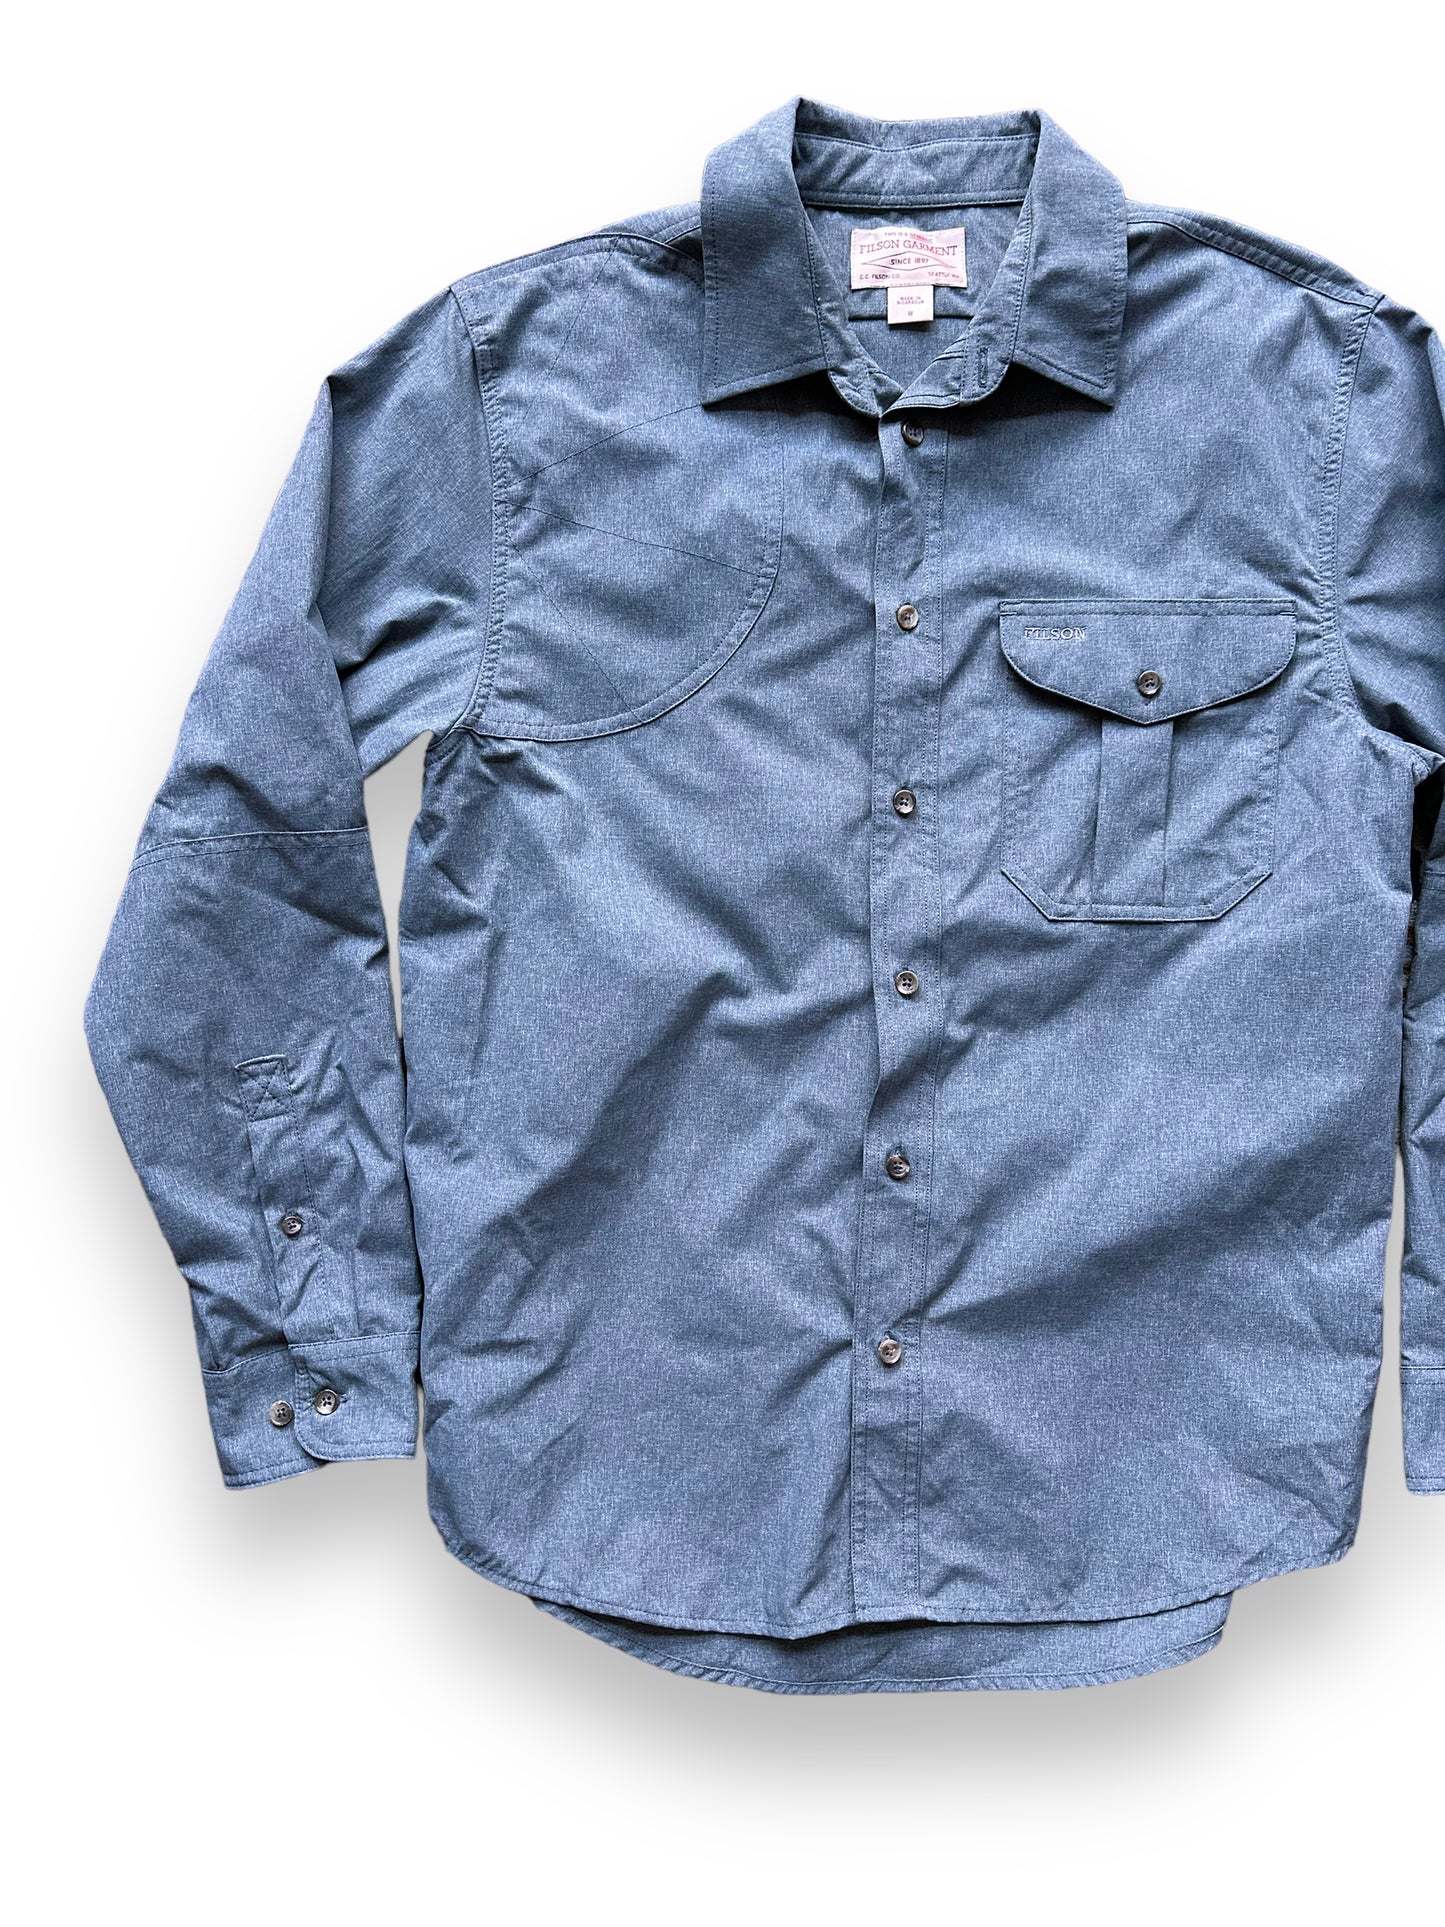 Front Right View of Filson Carbon Blue Right Handed Shooting Shirt SZ M |  Barn Owl Vintage Goods | Vintage Filson Workwear Seattle